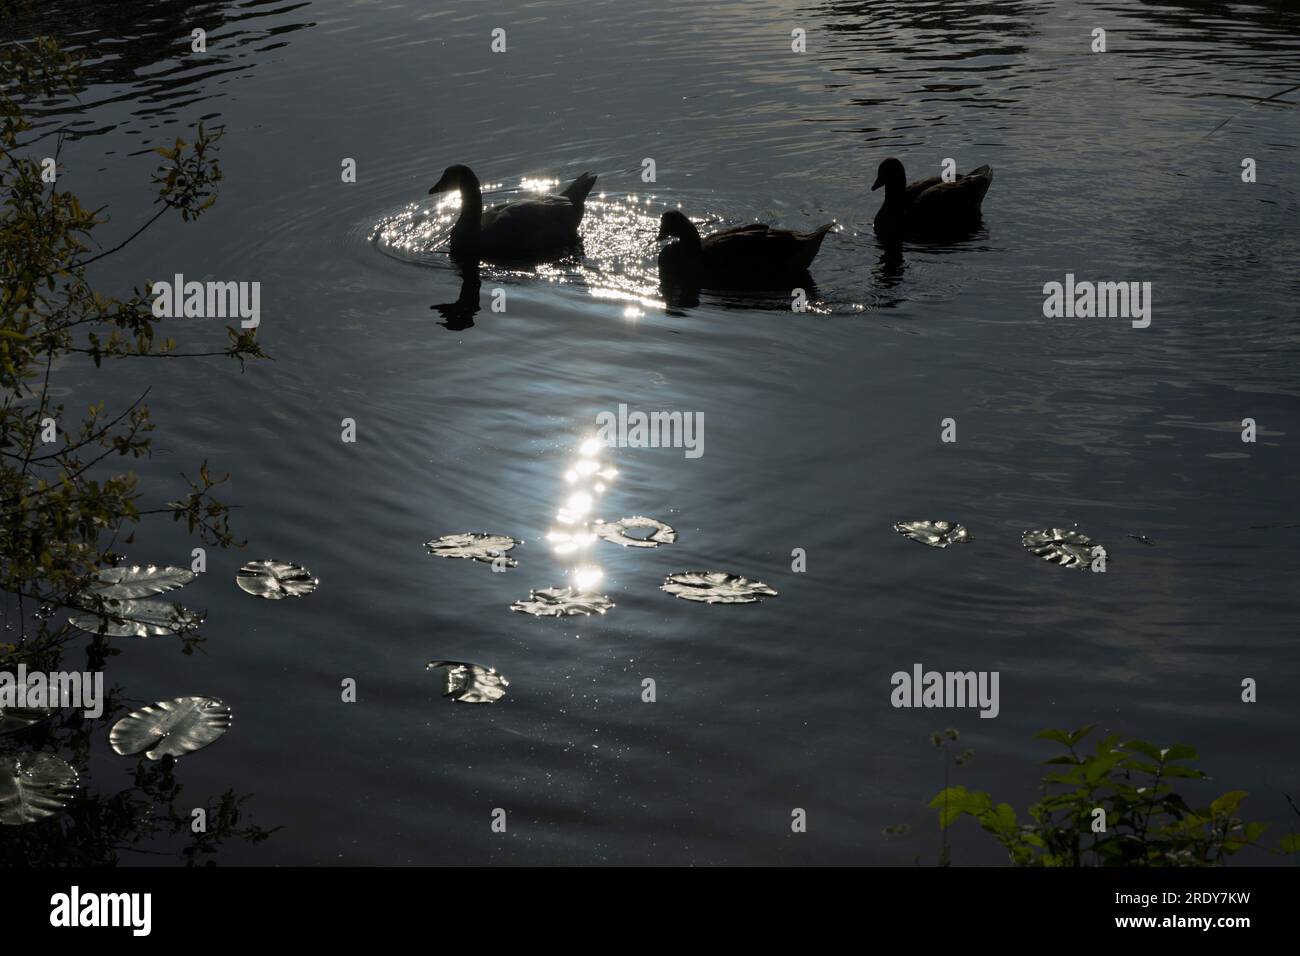 Just past Sandford Lock on the Thames, we see this serene composition of ducks, reflections and lily pads. It's early morning, and I'm on my daily wal Stock Photo